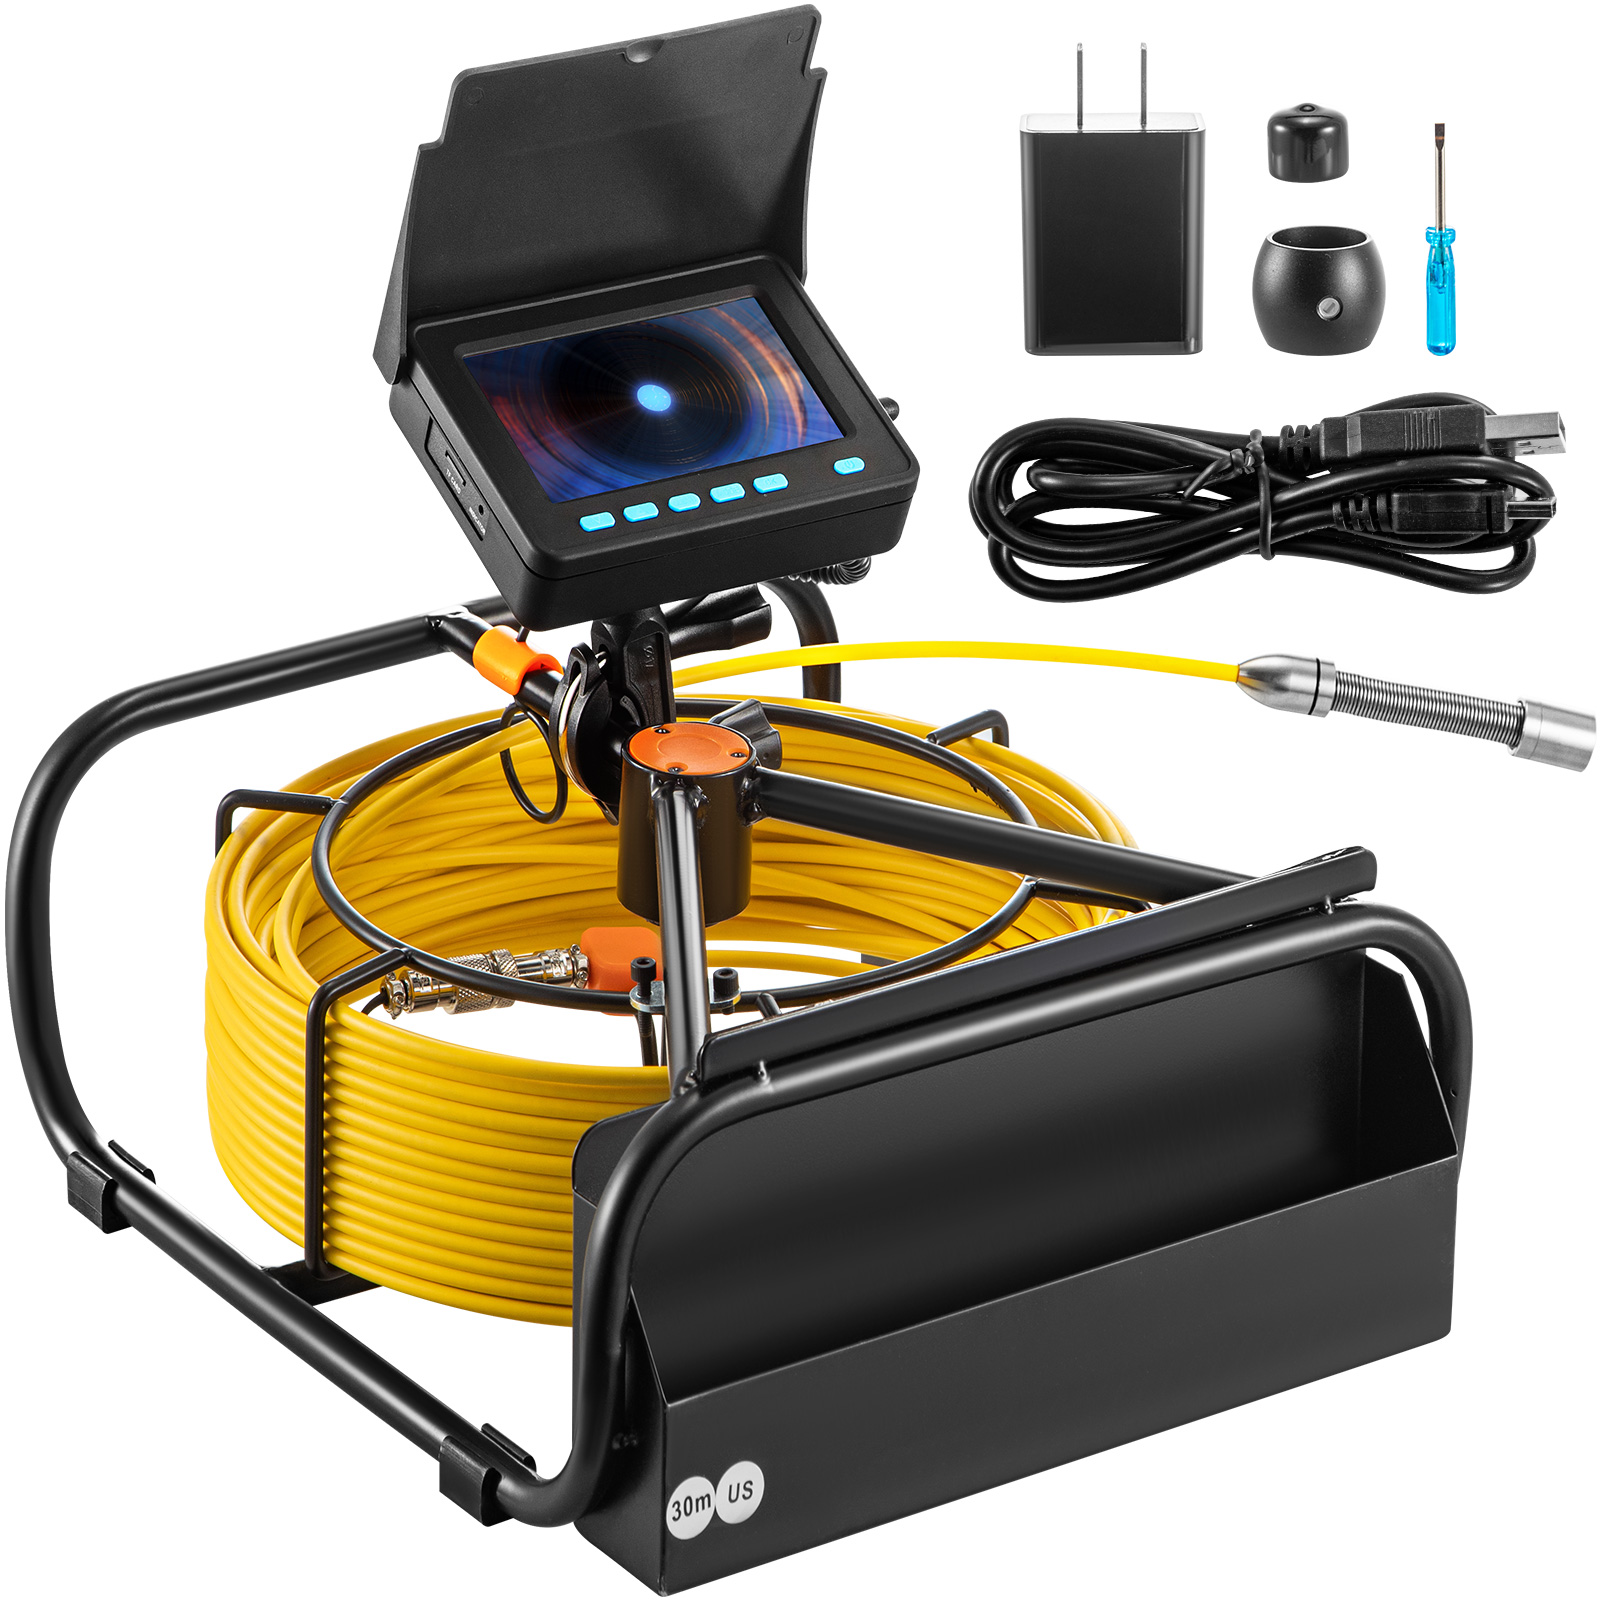 Pipe Inspection Camera,10M / 32.8FT Cable,4.3 In. Monitor